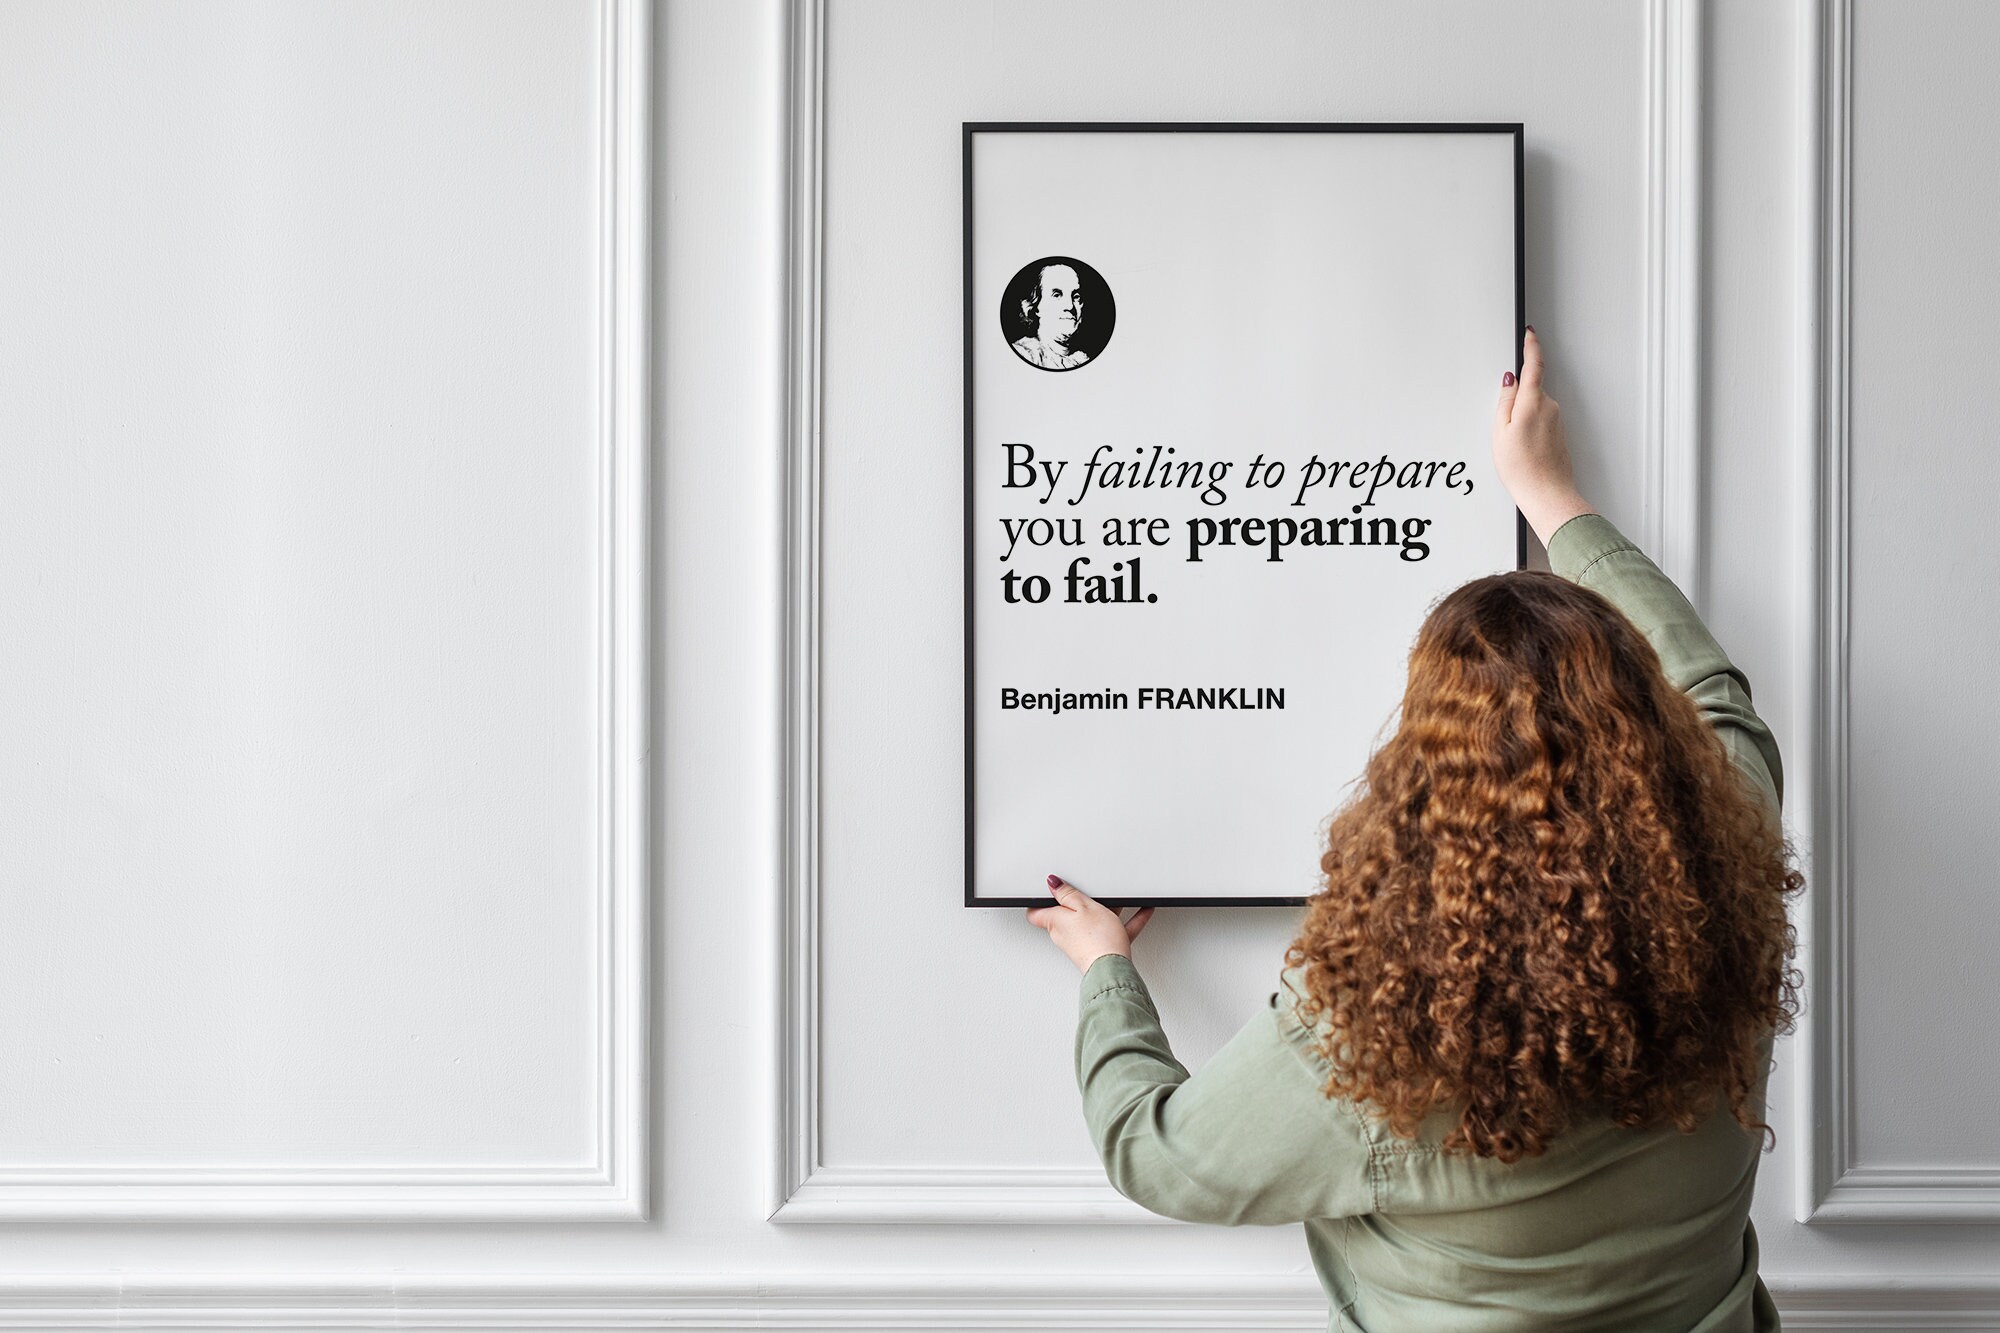 Ben Franklin NEW Classroom Motivational POSTER By Failing to Prepare .. 